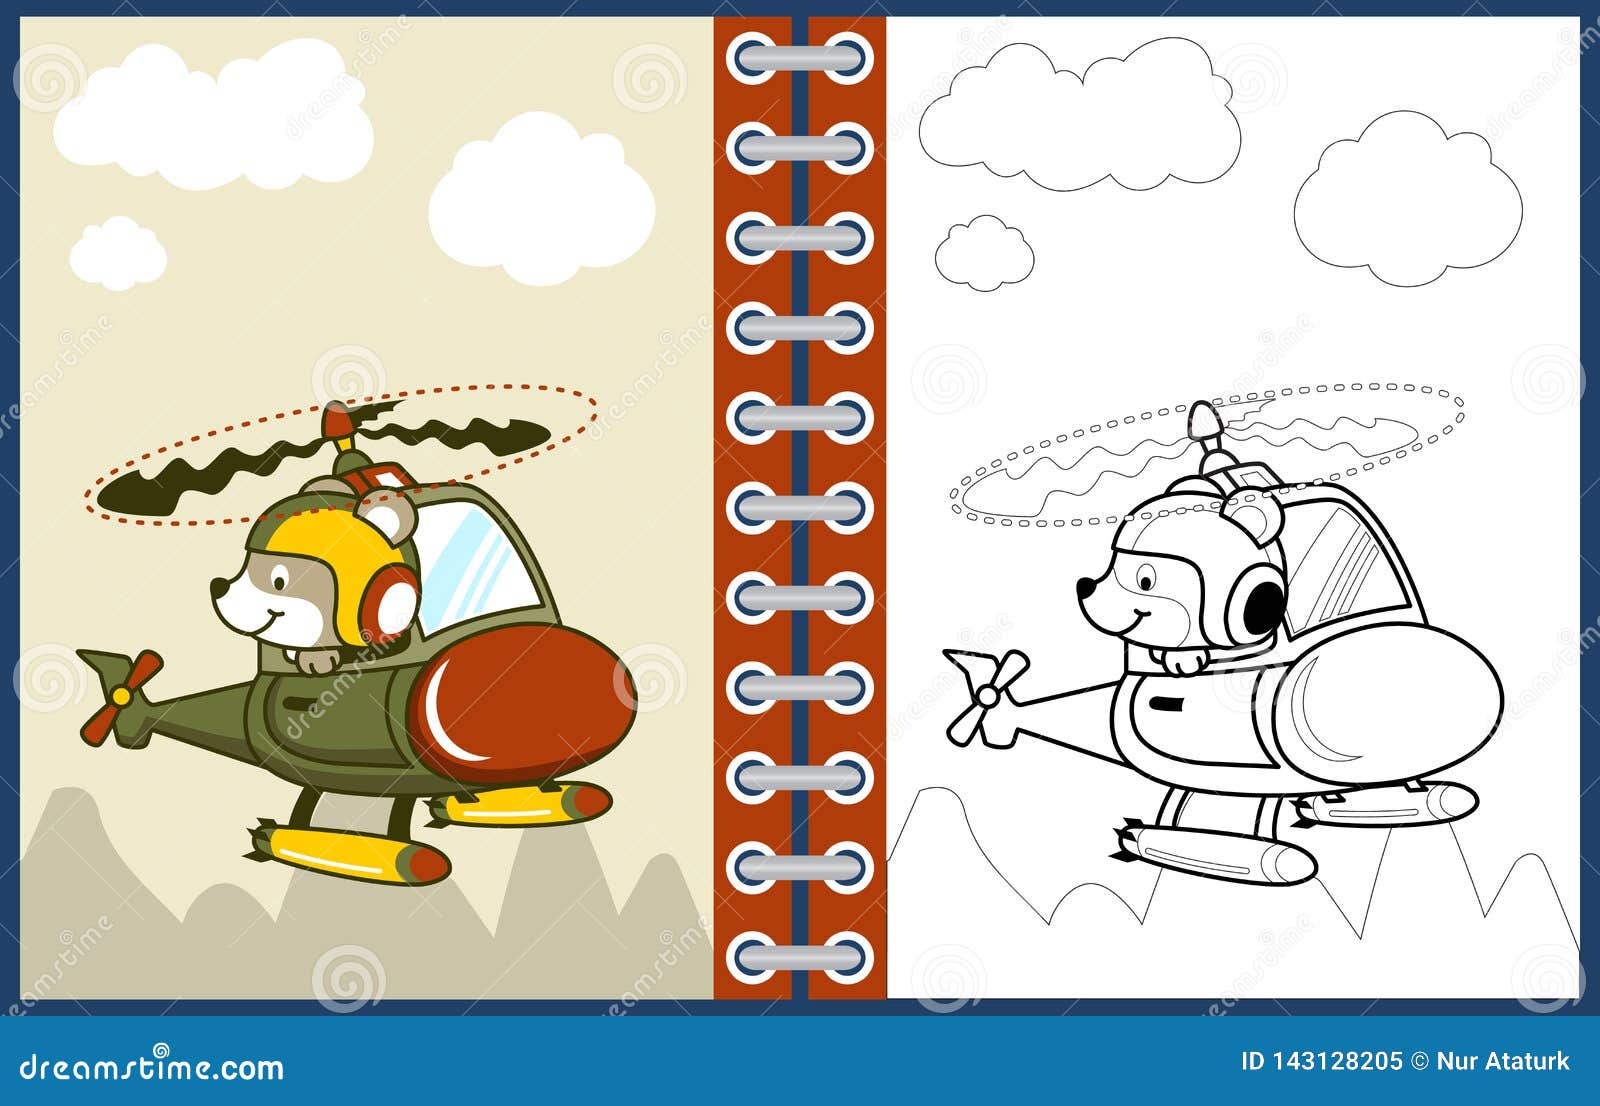 Nice Pilot Cartoon On Helicopter, Coloring Page Or Book Stock Vector